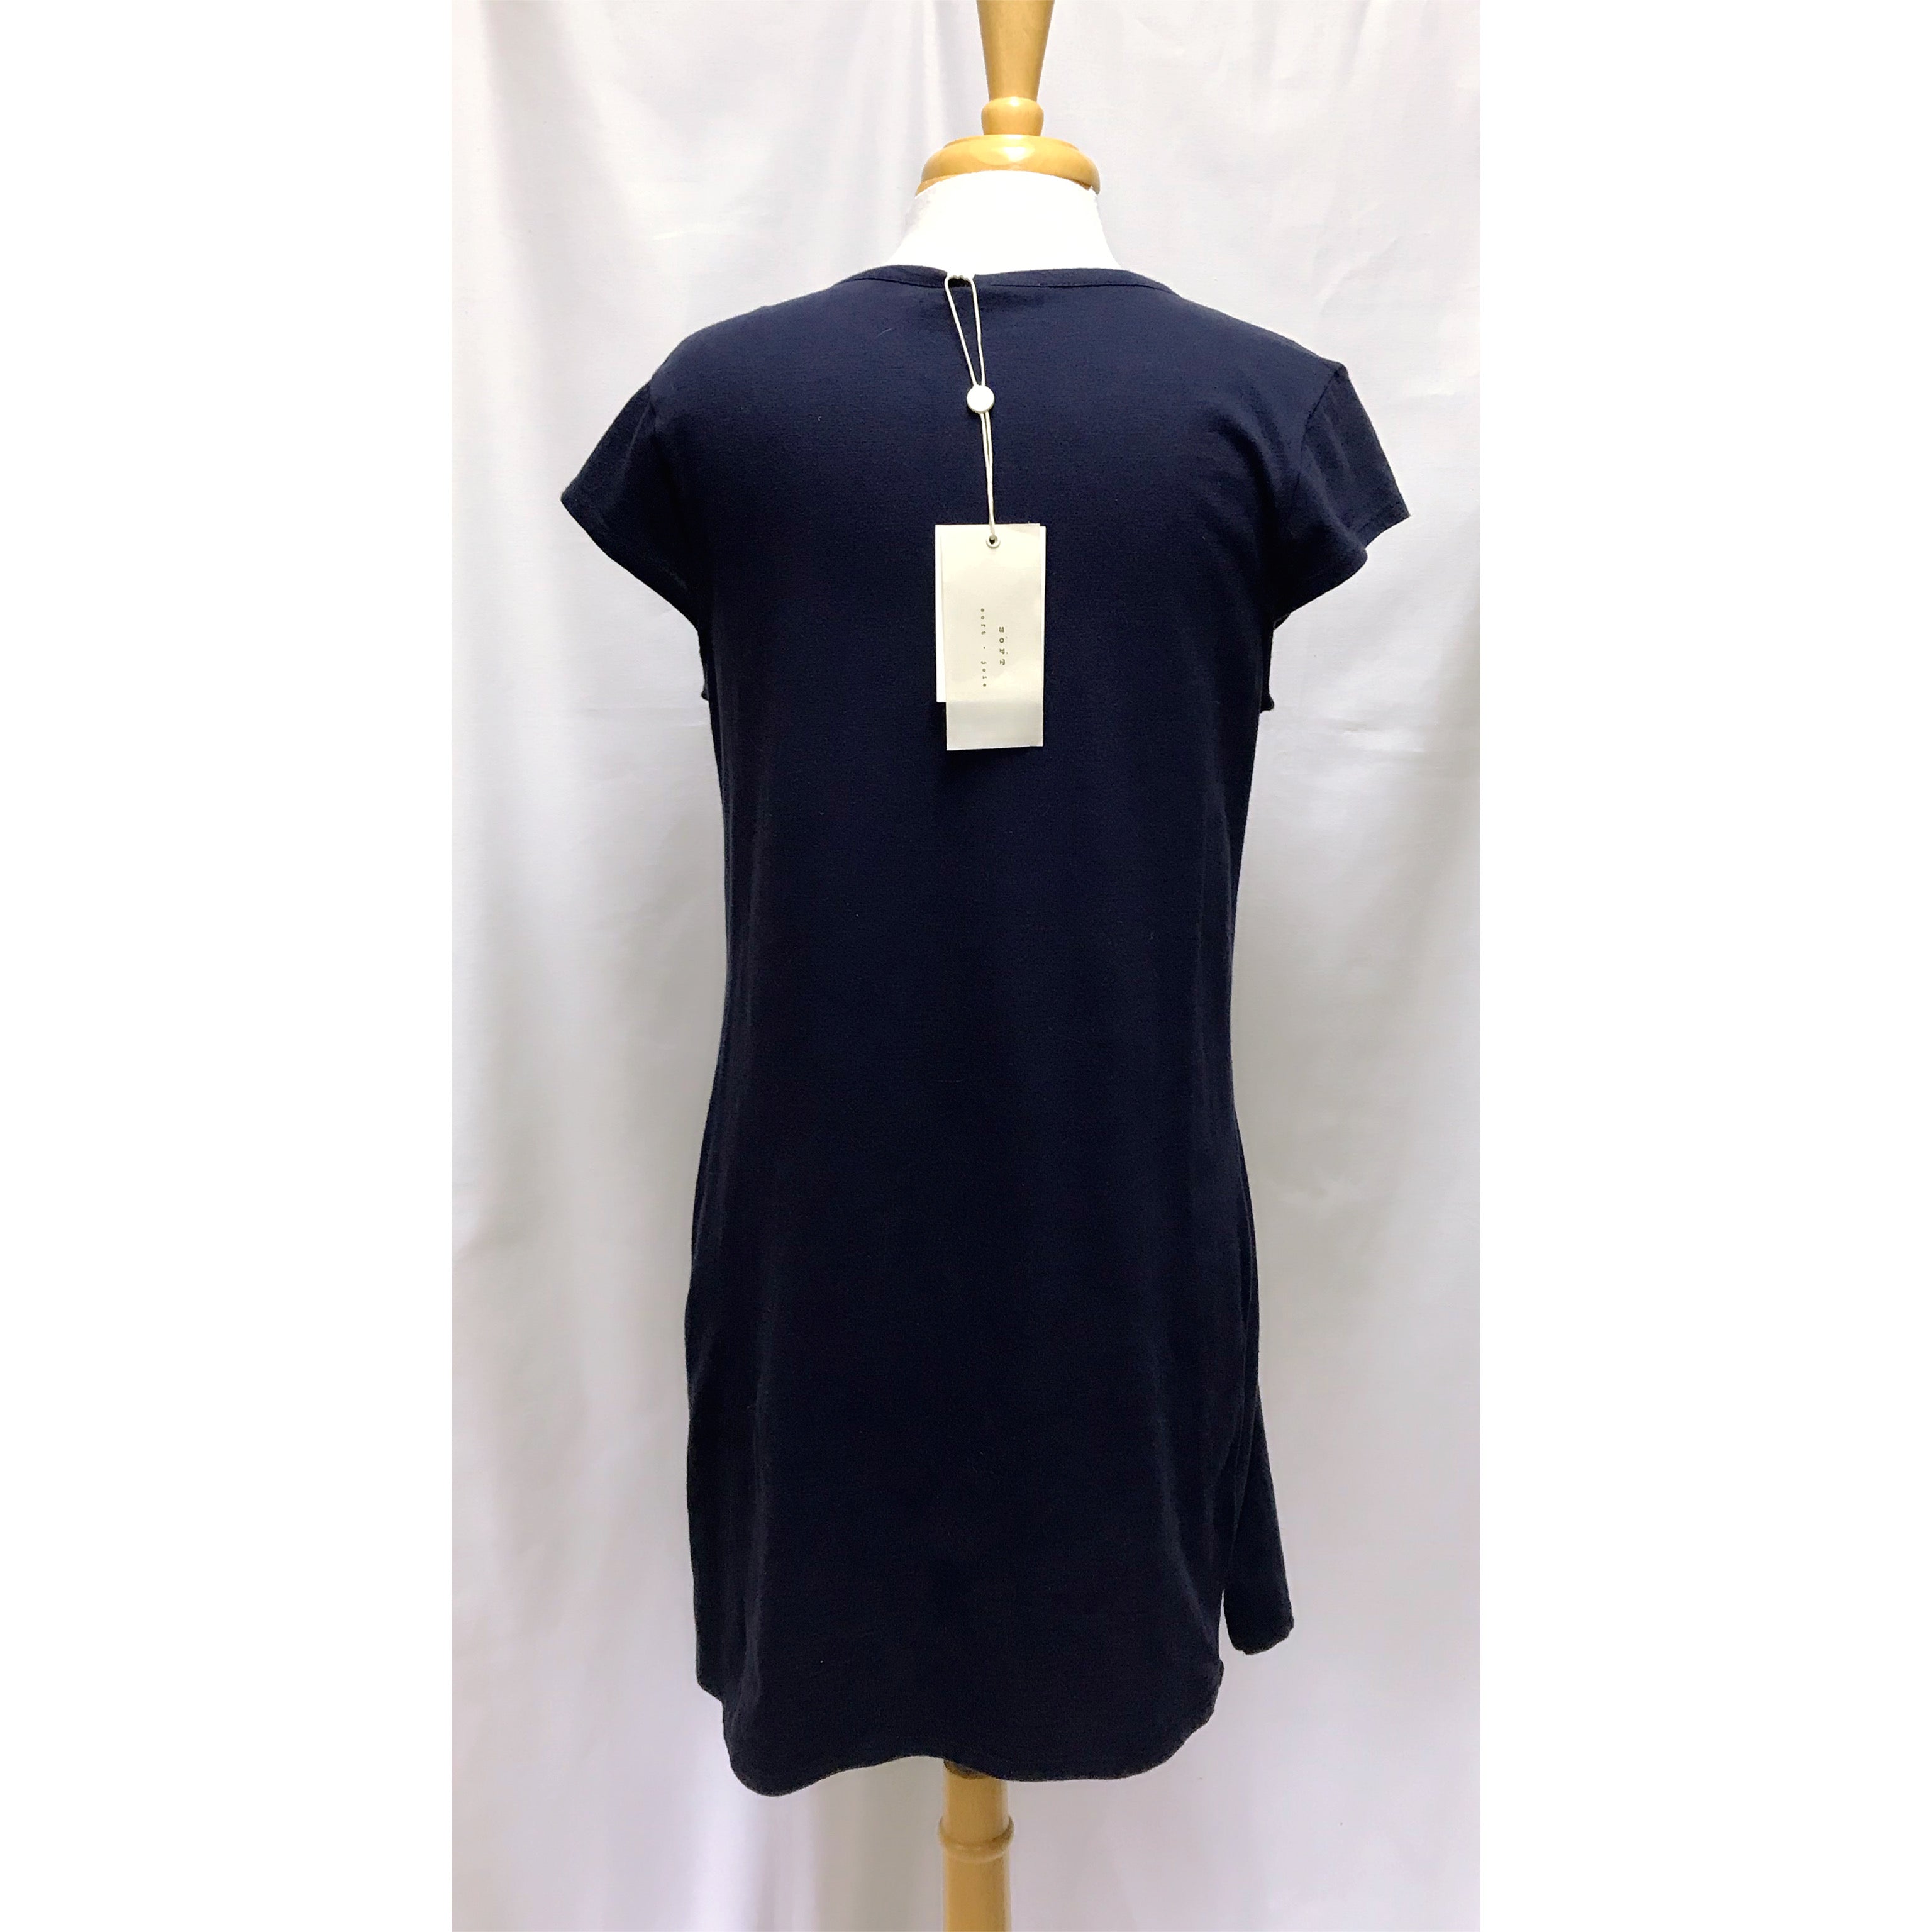 Soft Joie navy embroidered dress, size M, NEW WITH TAGS!